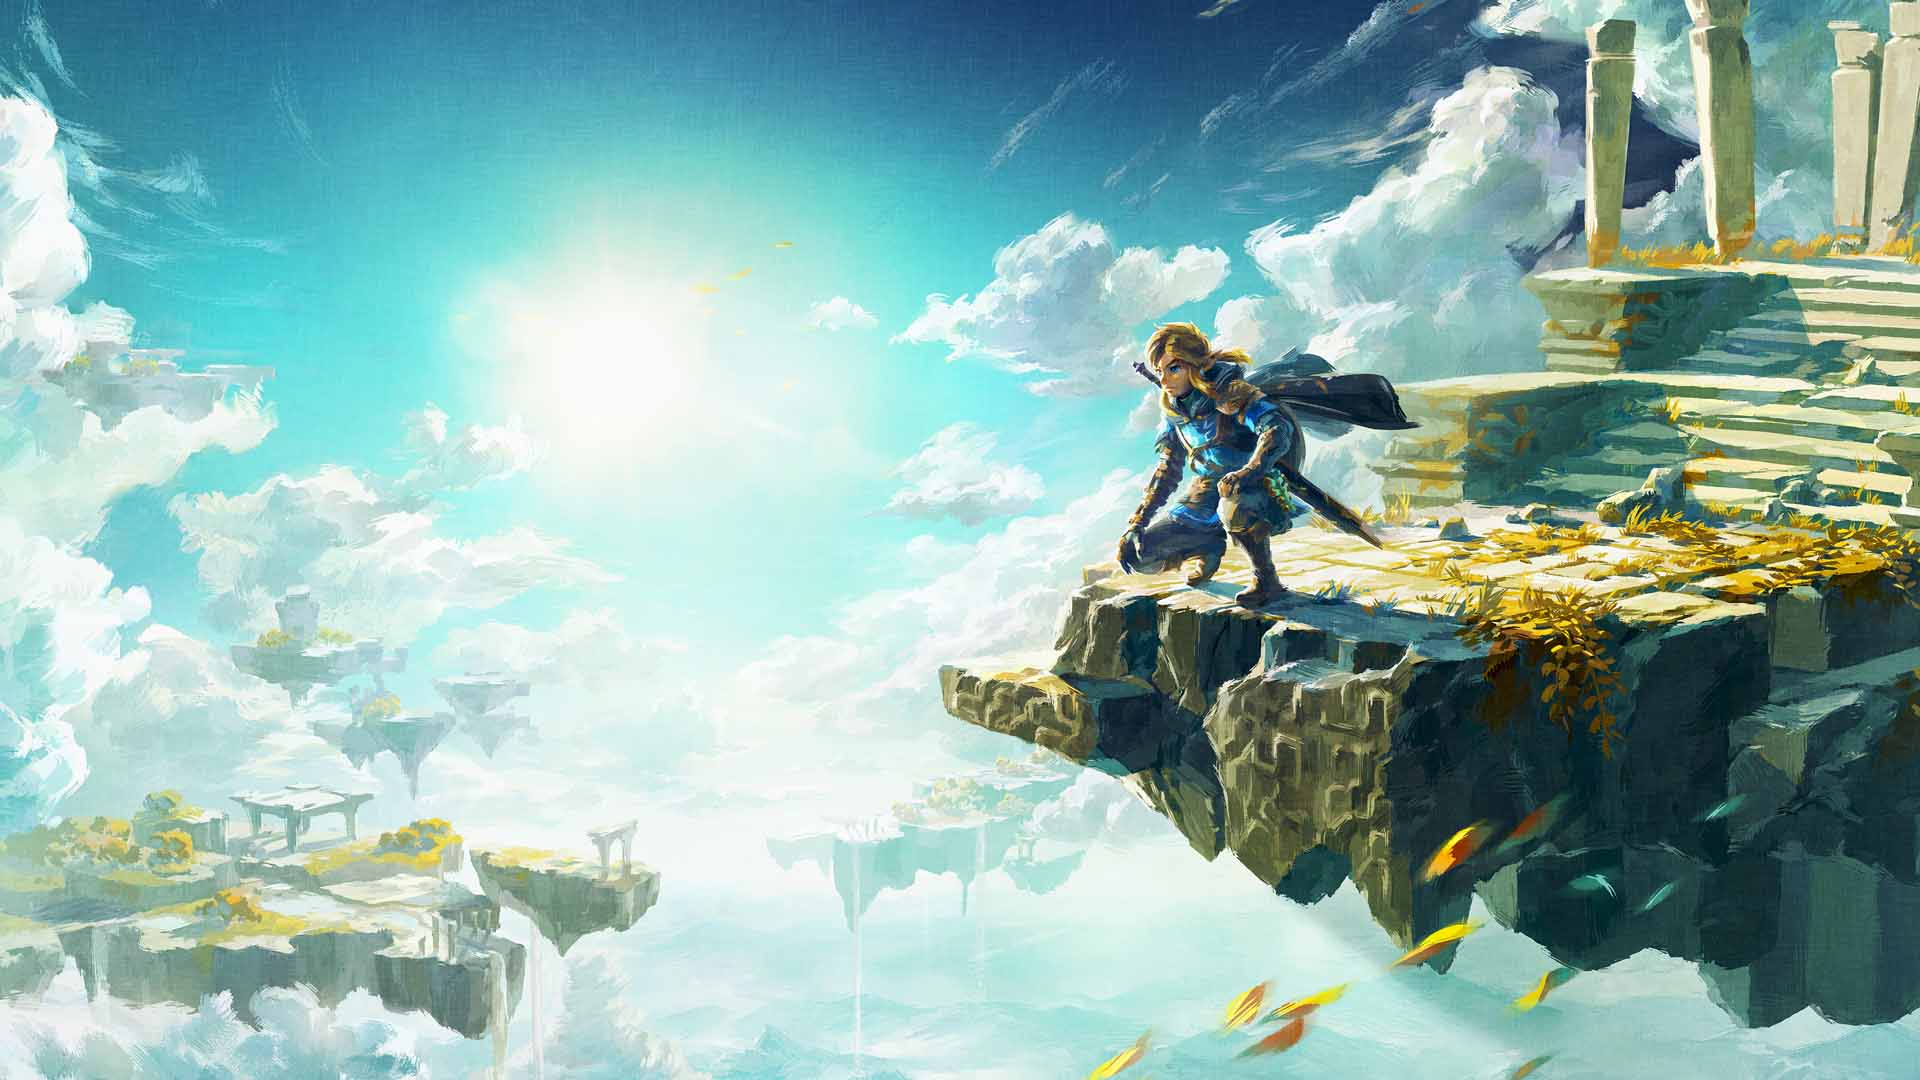 Official artwork of the game. Link stands on a floating island, with more floating island and clouds in the background